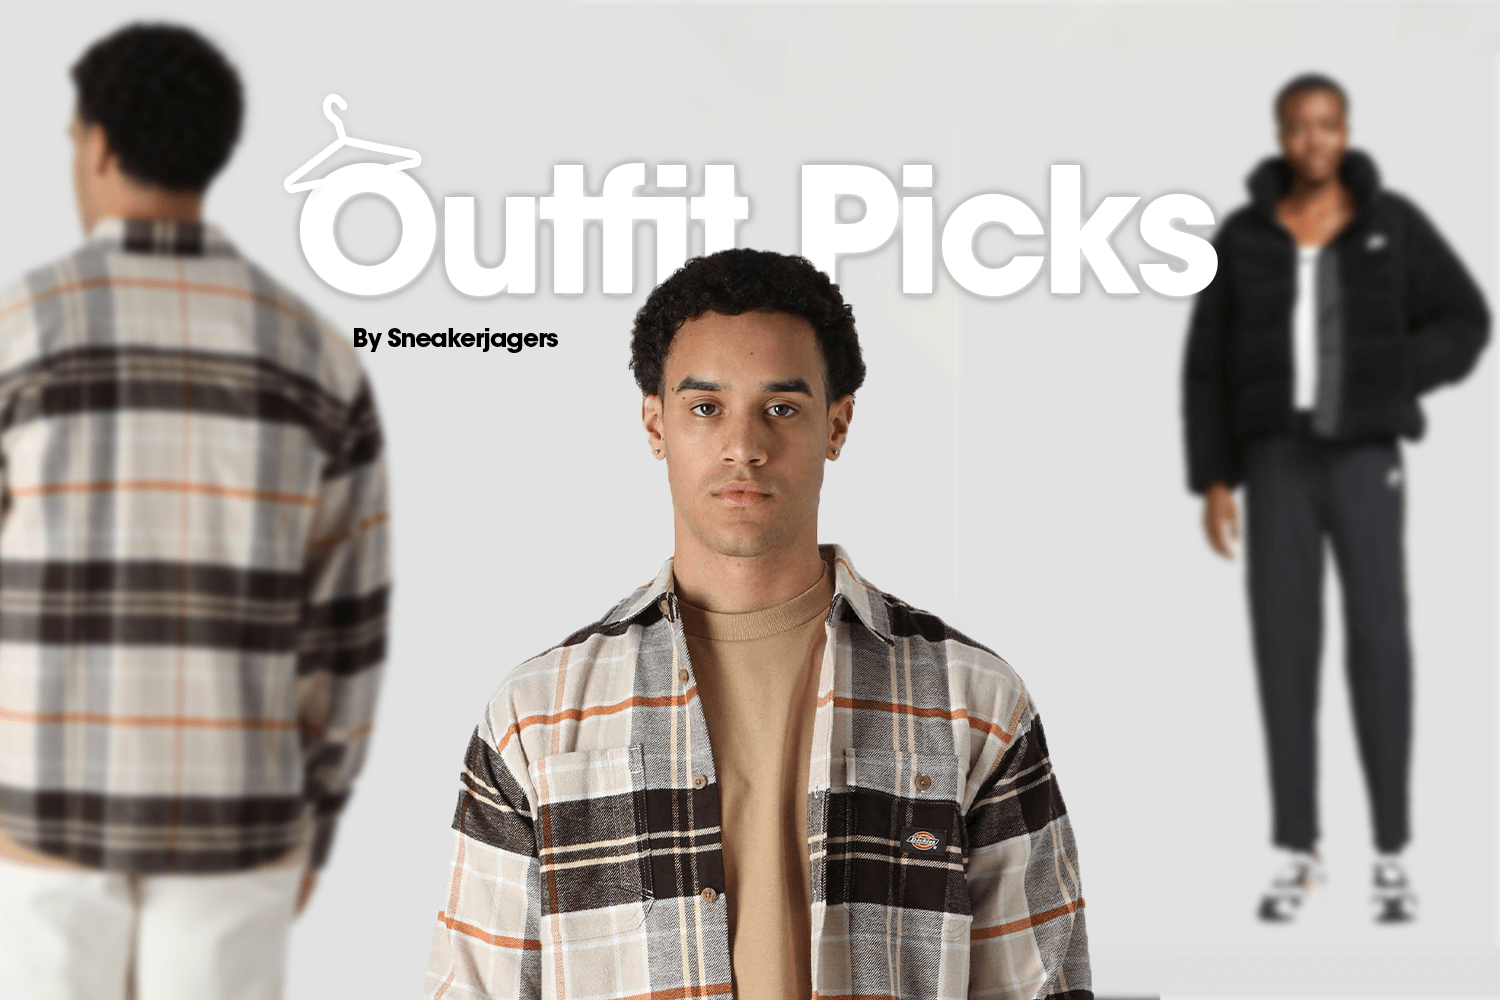 Outfit Picks by Sneakerjagers - Woche 7